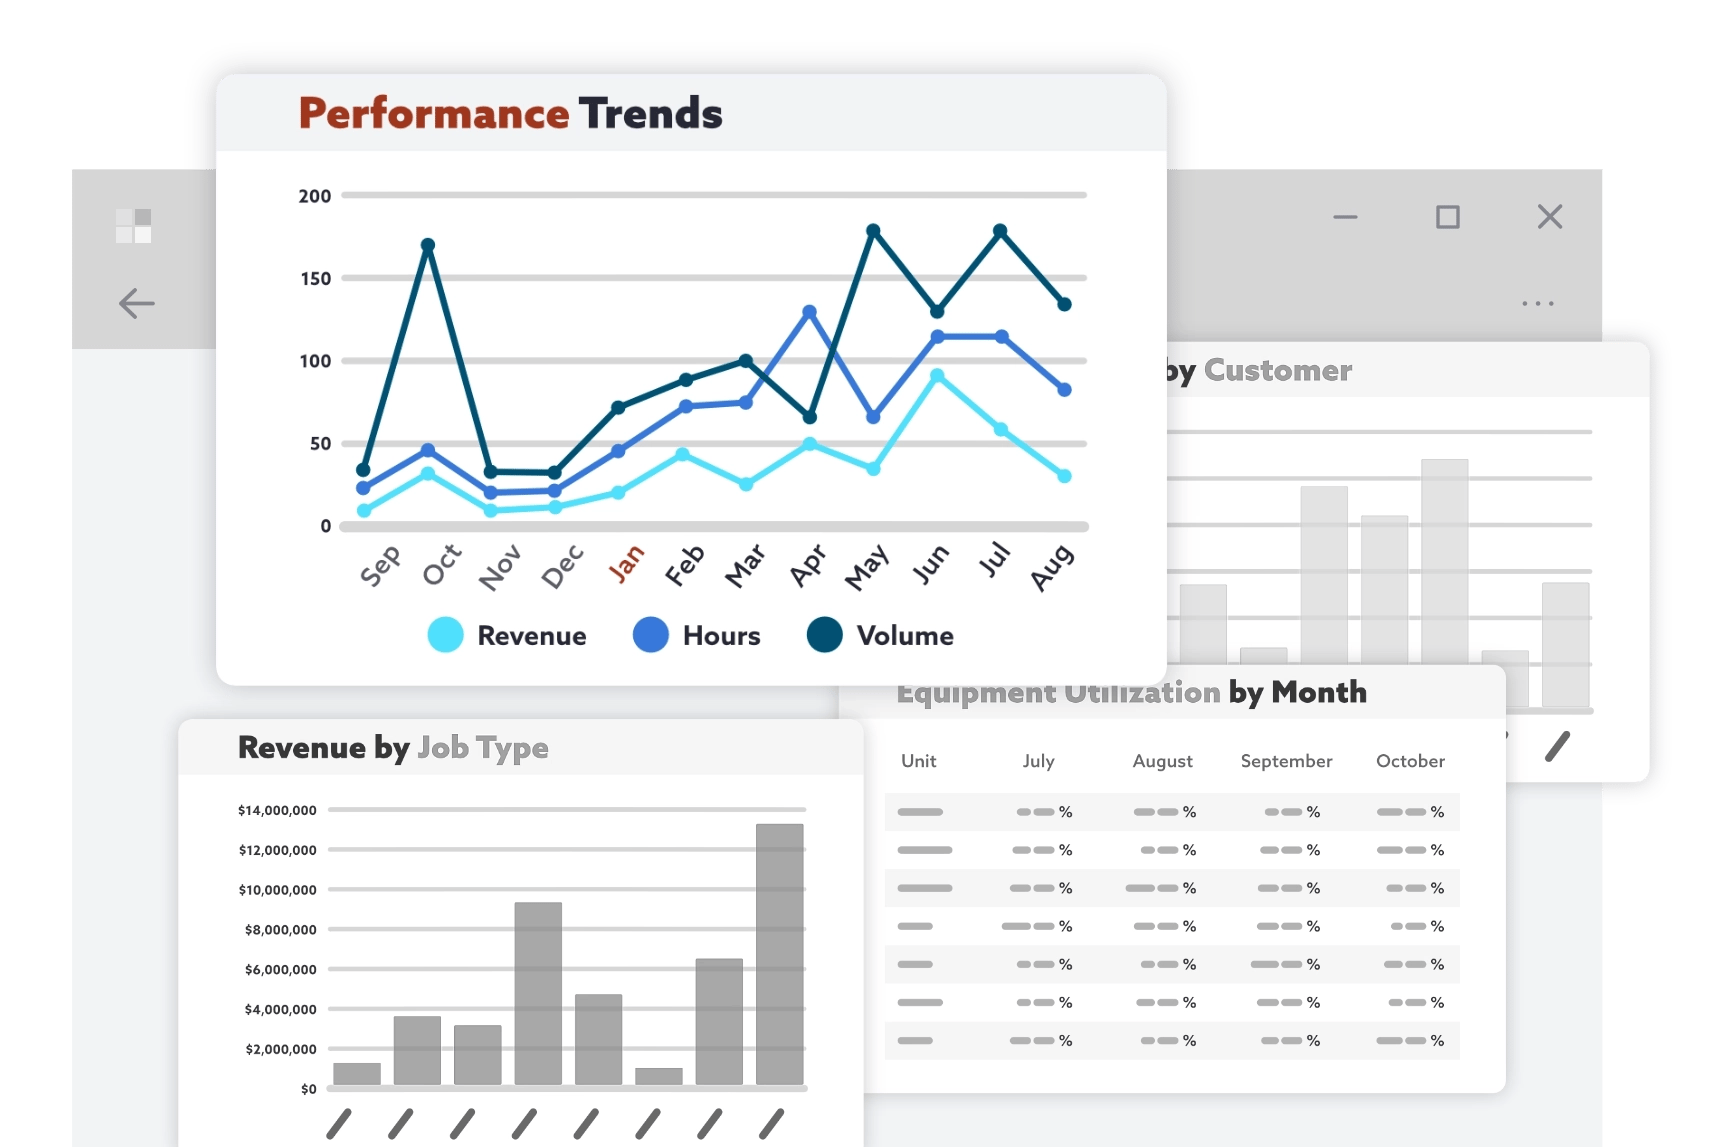 Analytics dashboard showing performance trends